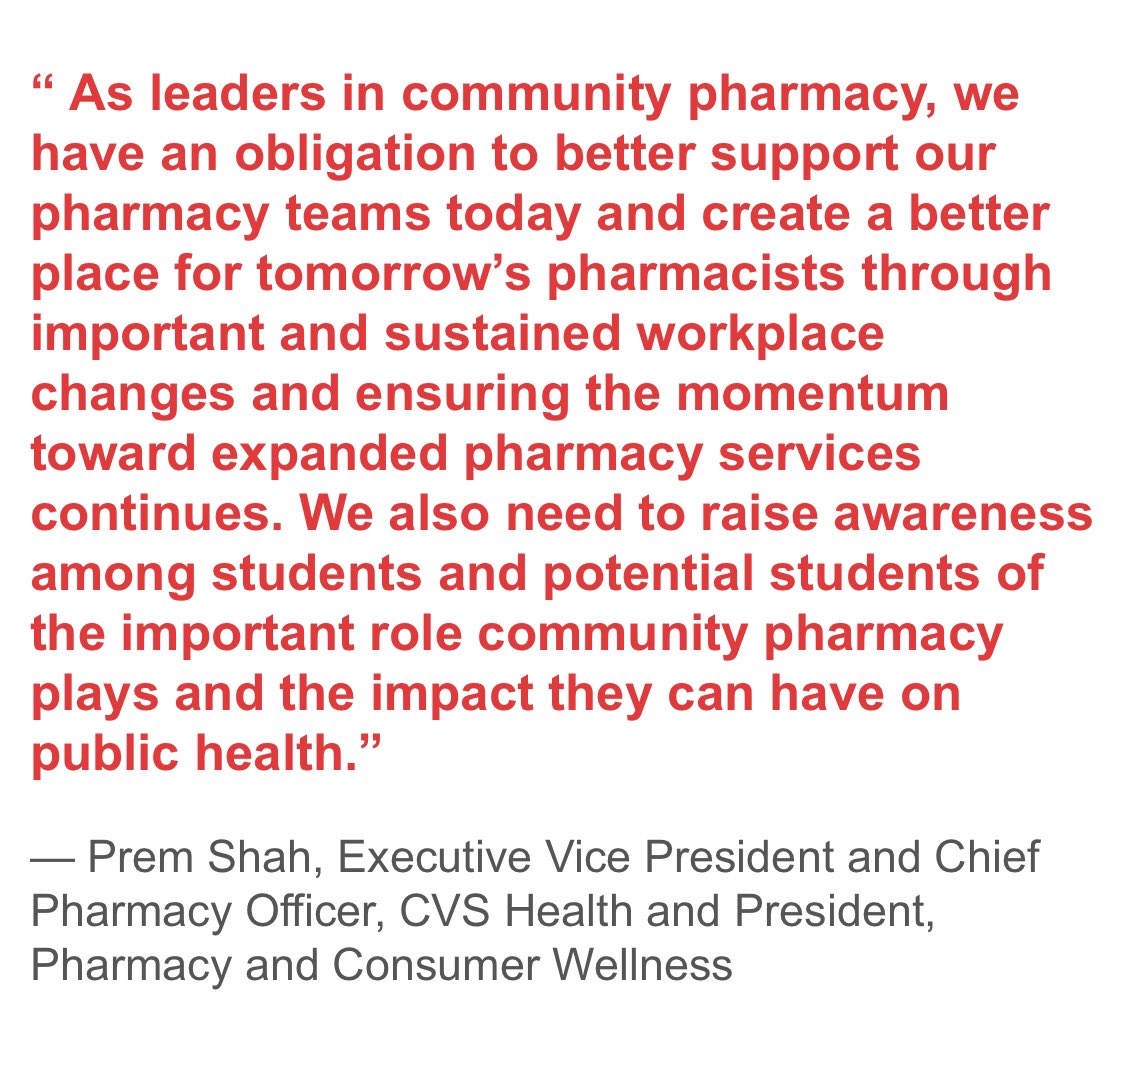 Dear @cvspharmacy , 

Even if your insurance company CVS Caremark runs me out of business, I will never work for your sham of a company.

I am already a leader in MY community pharmacy. You know the one you pay pennies on the dollar to dispense life-saving prescriptions.